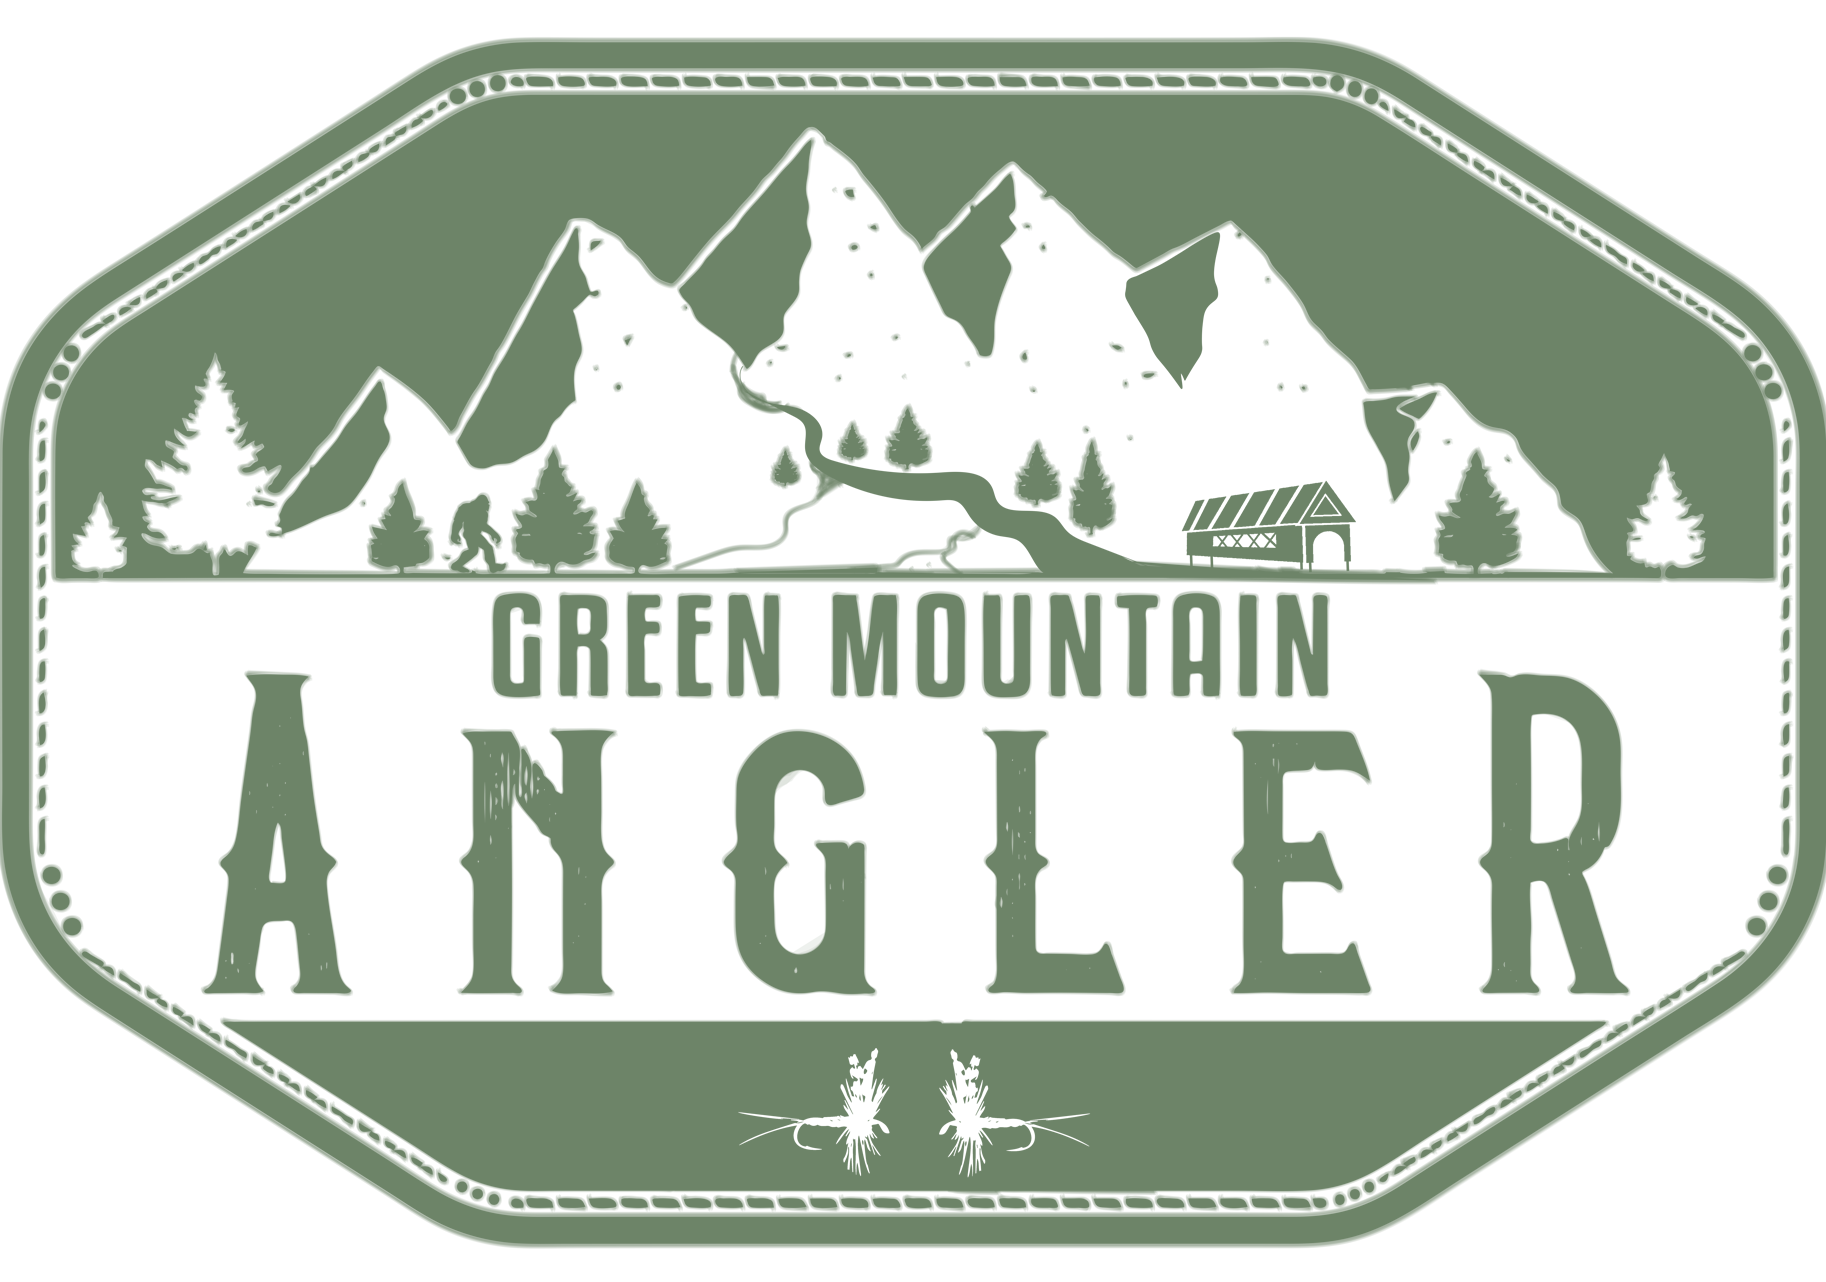 Green Mountain Angler | Vermont Fishing Guide